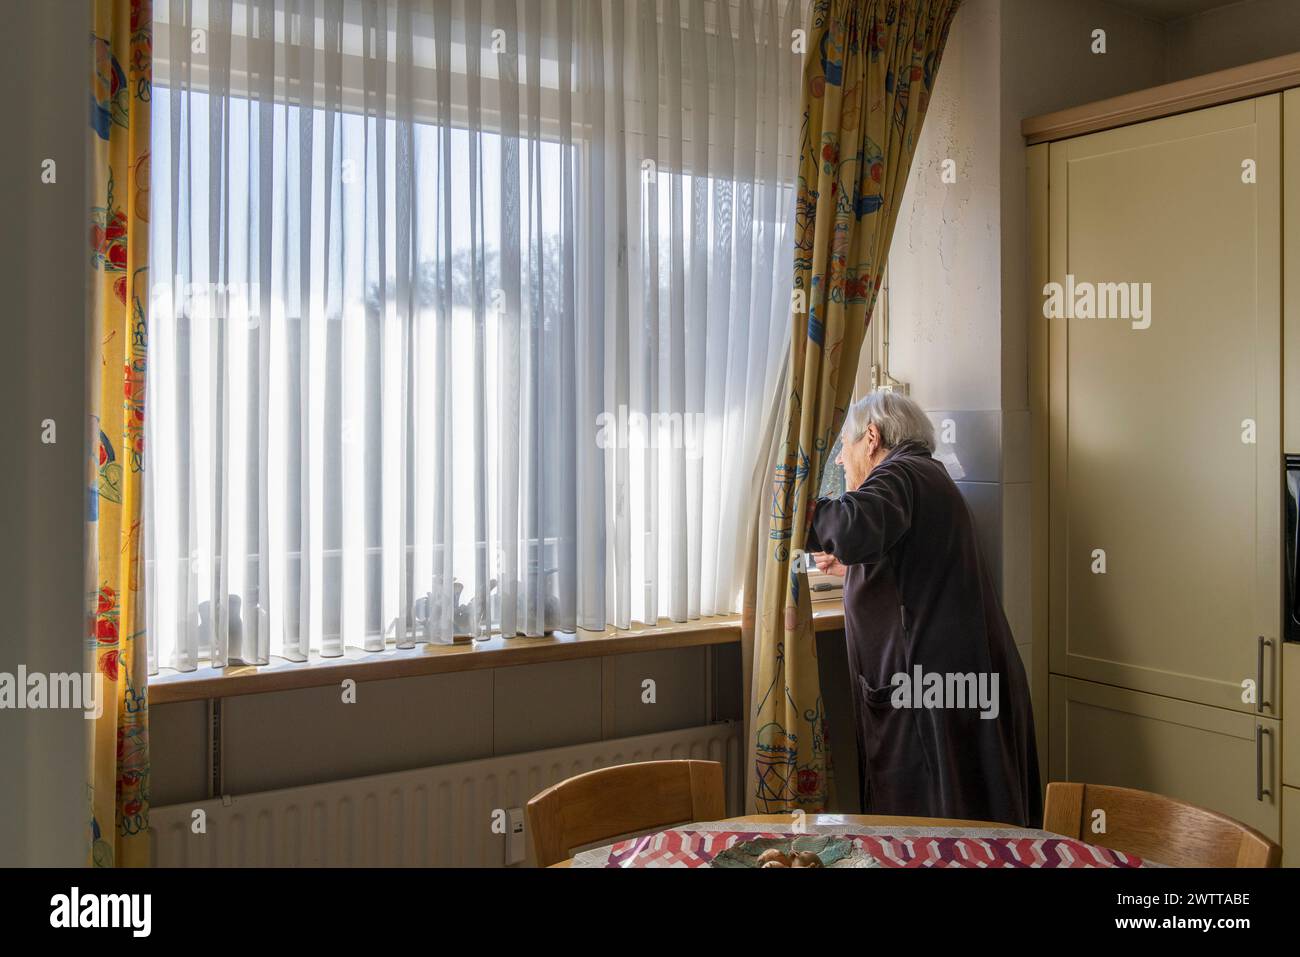 Elderly person gazing out a sunny kitchen window in contemplation. Stock Photo